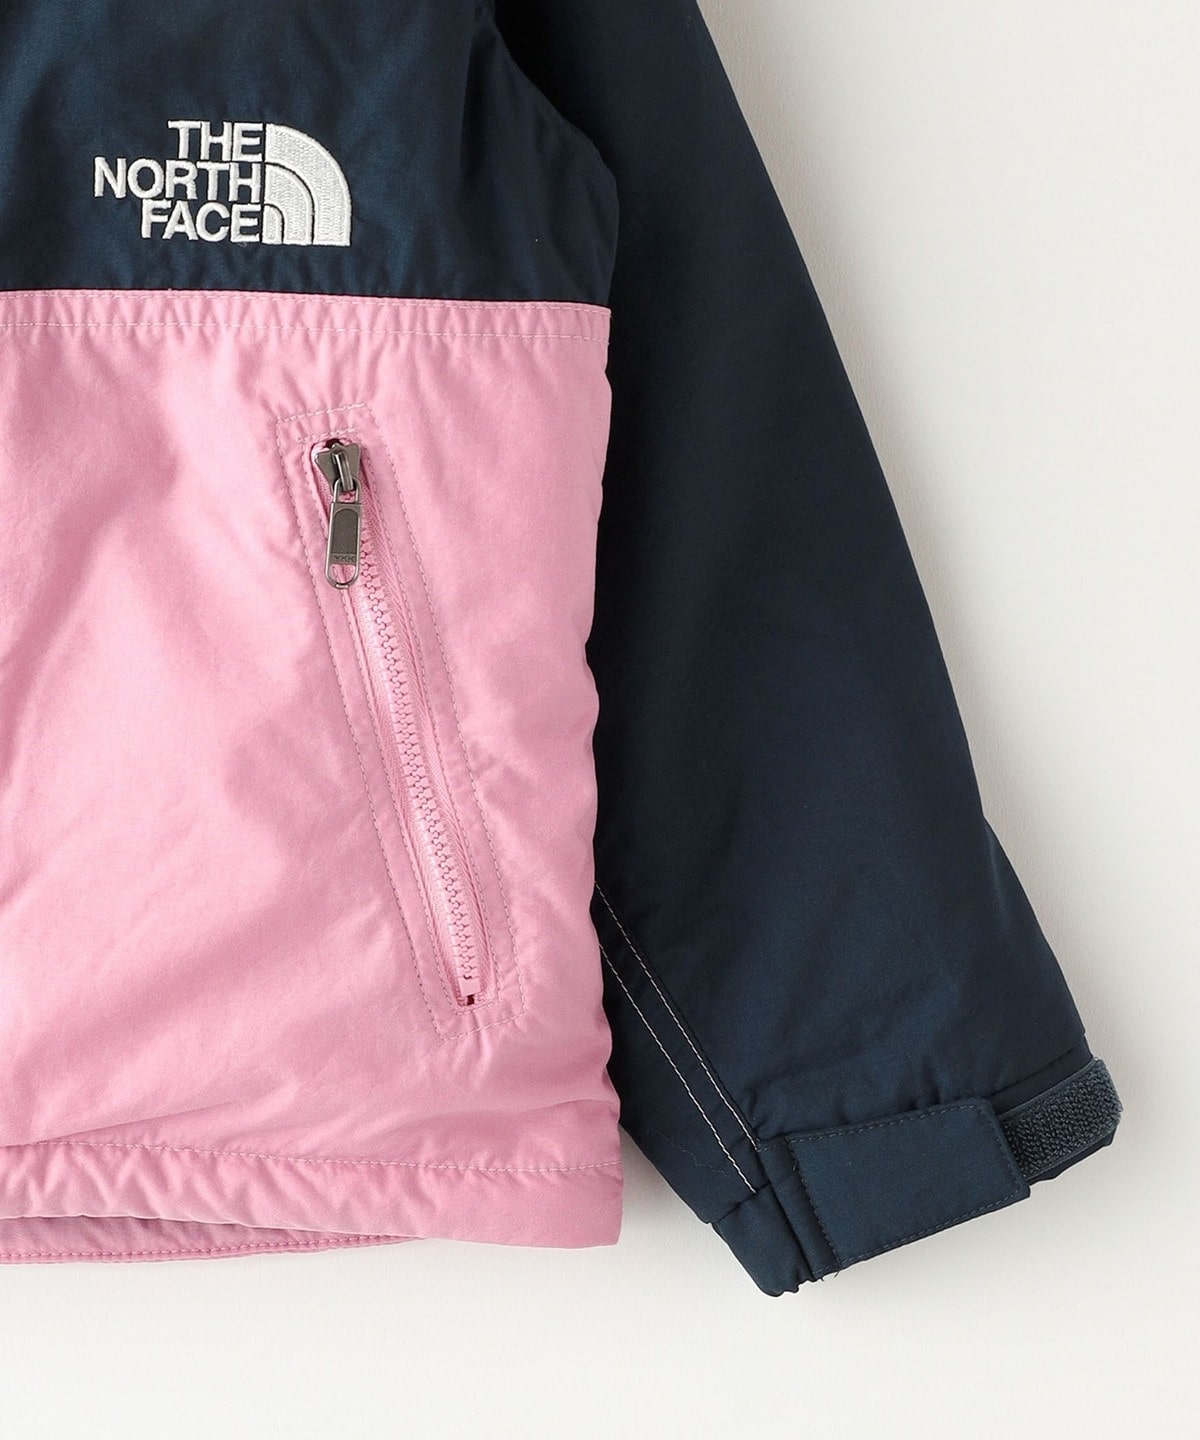 THE NORTH FACE:100～150cm / Compact Nomad Jacket: アウター 